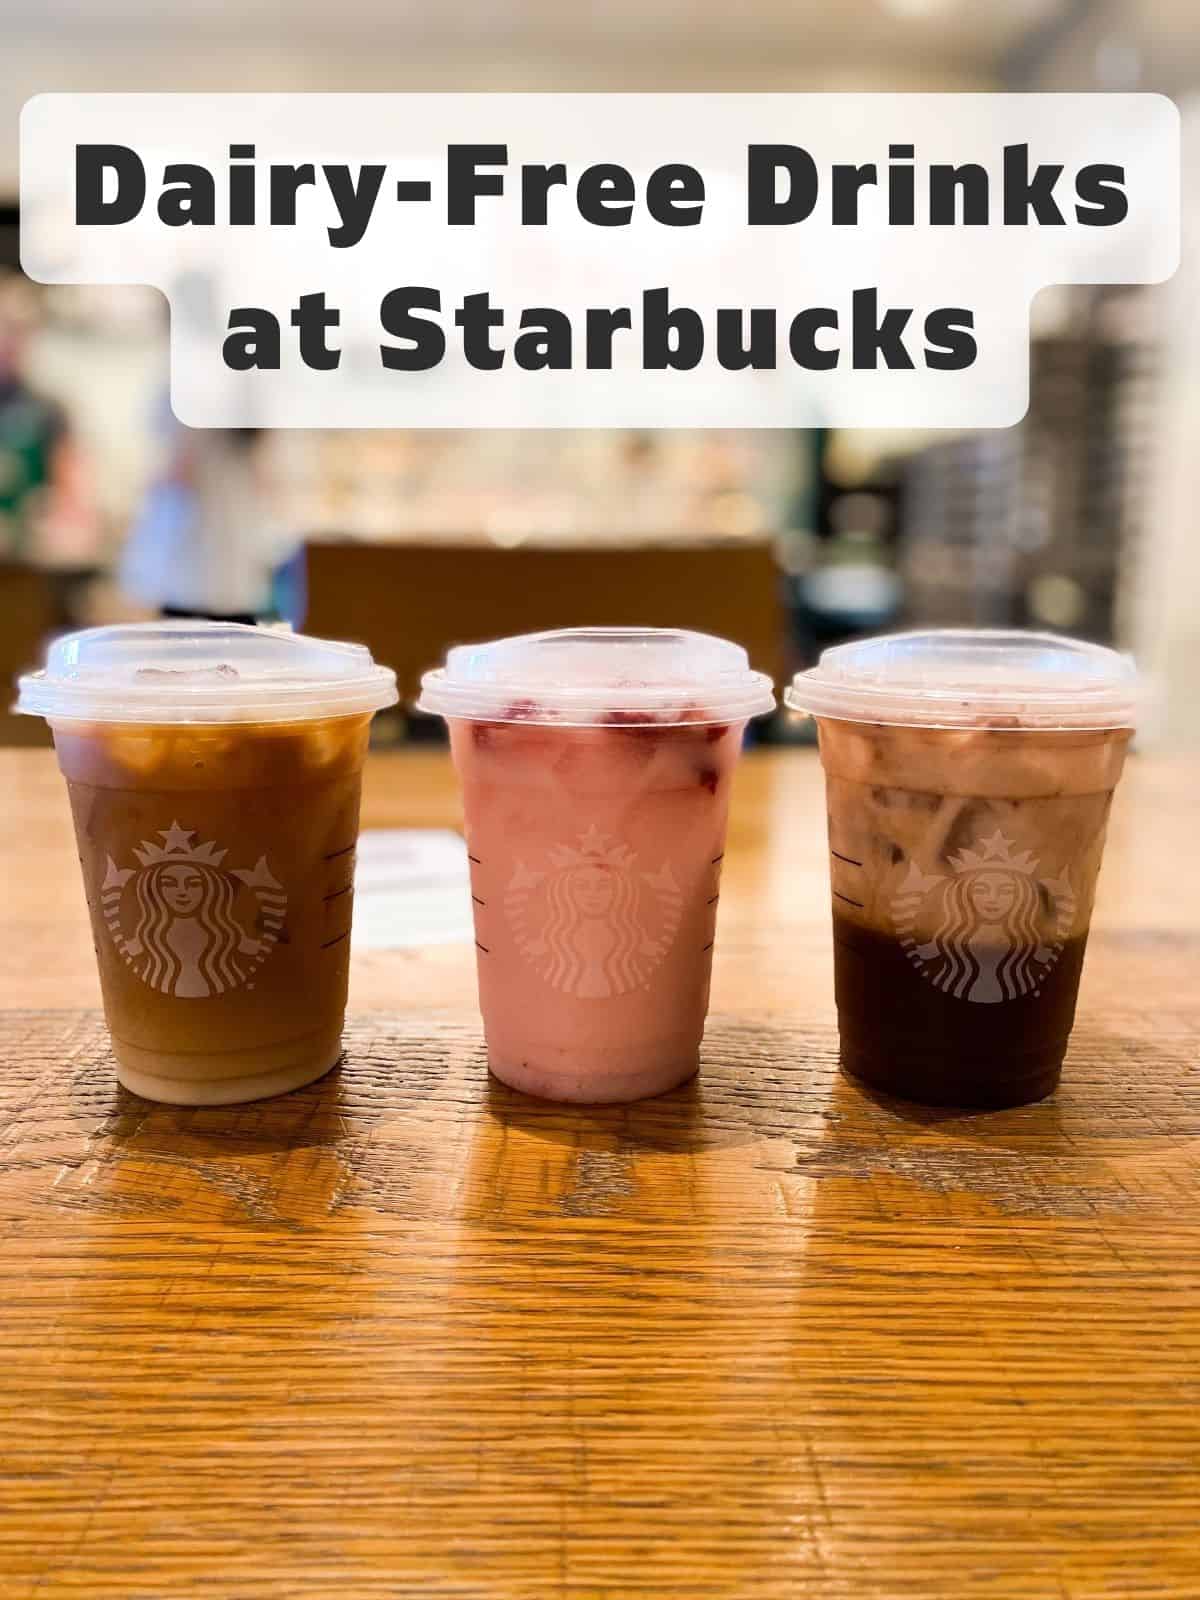 dairy free drinks at starbucks with title overlay.